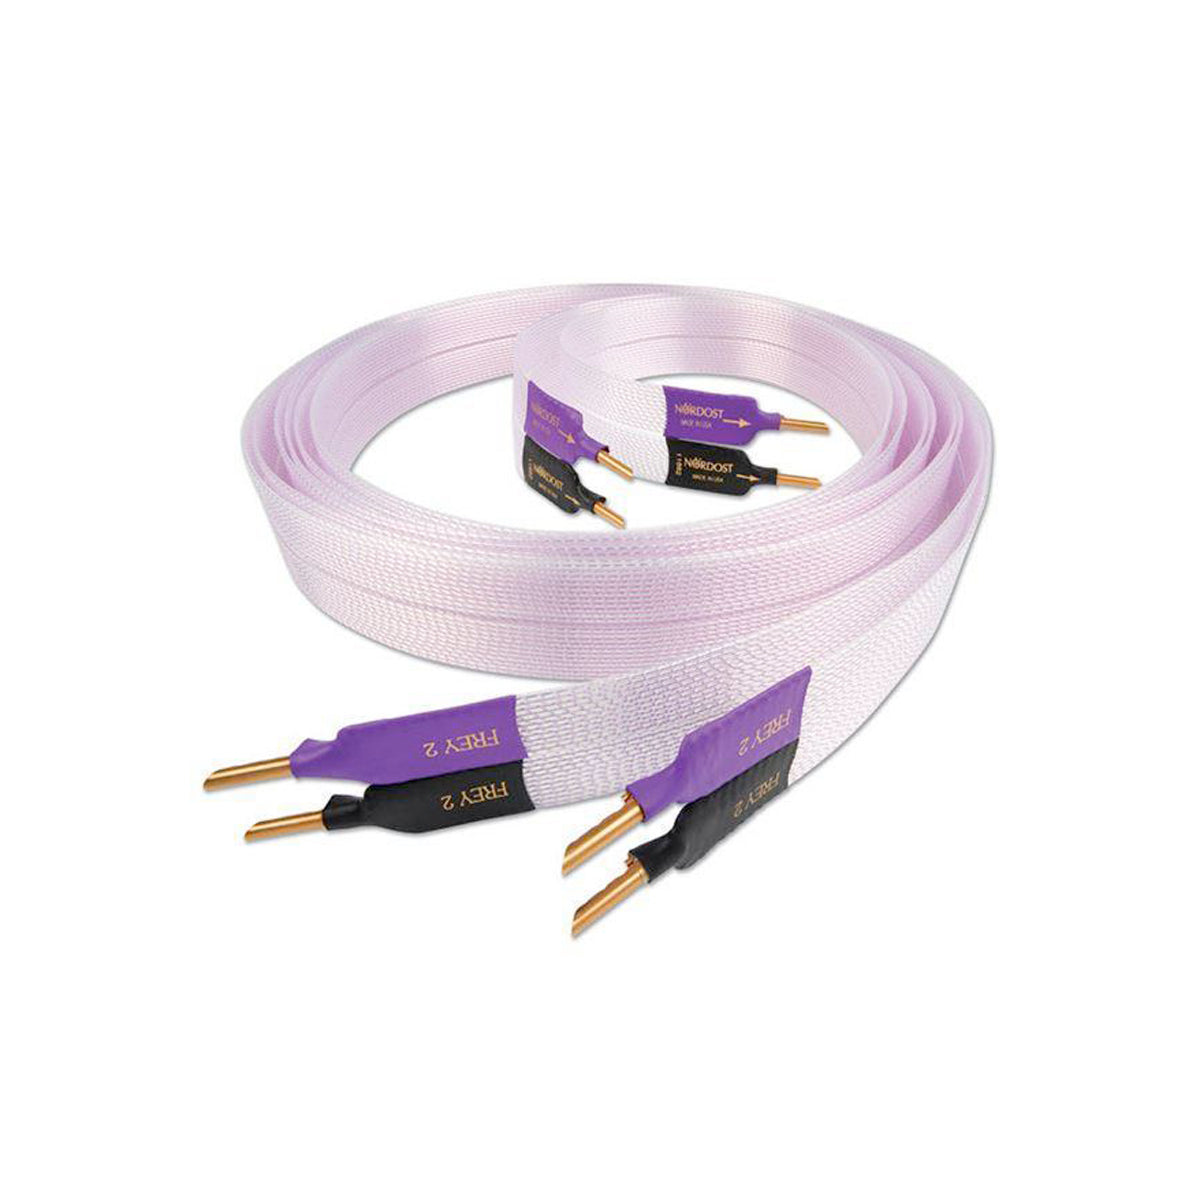 Nordost Frey2 Speaker Cable - The Audio Experts